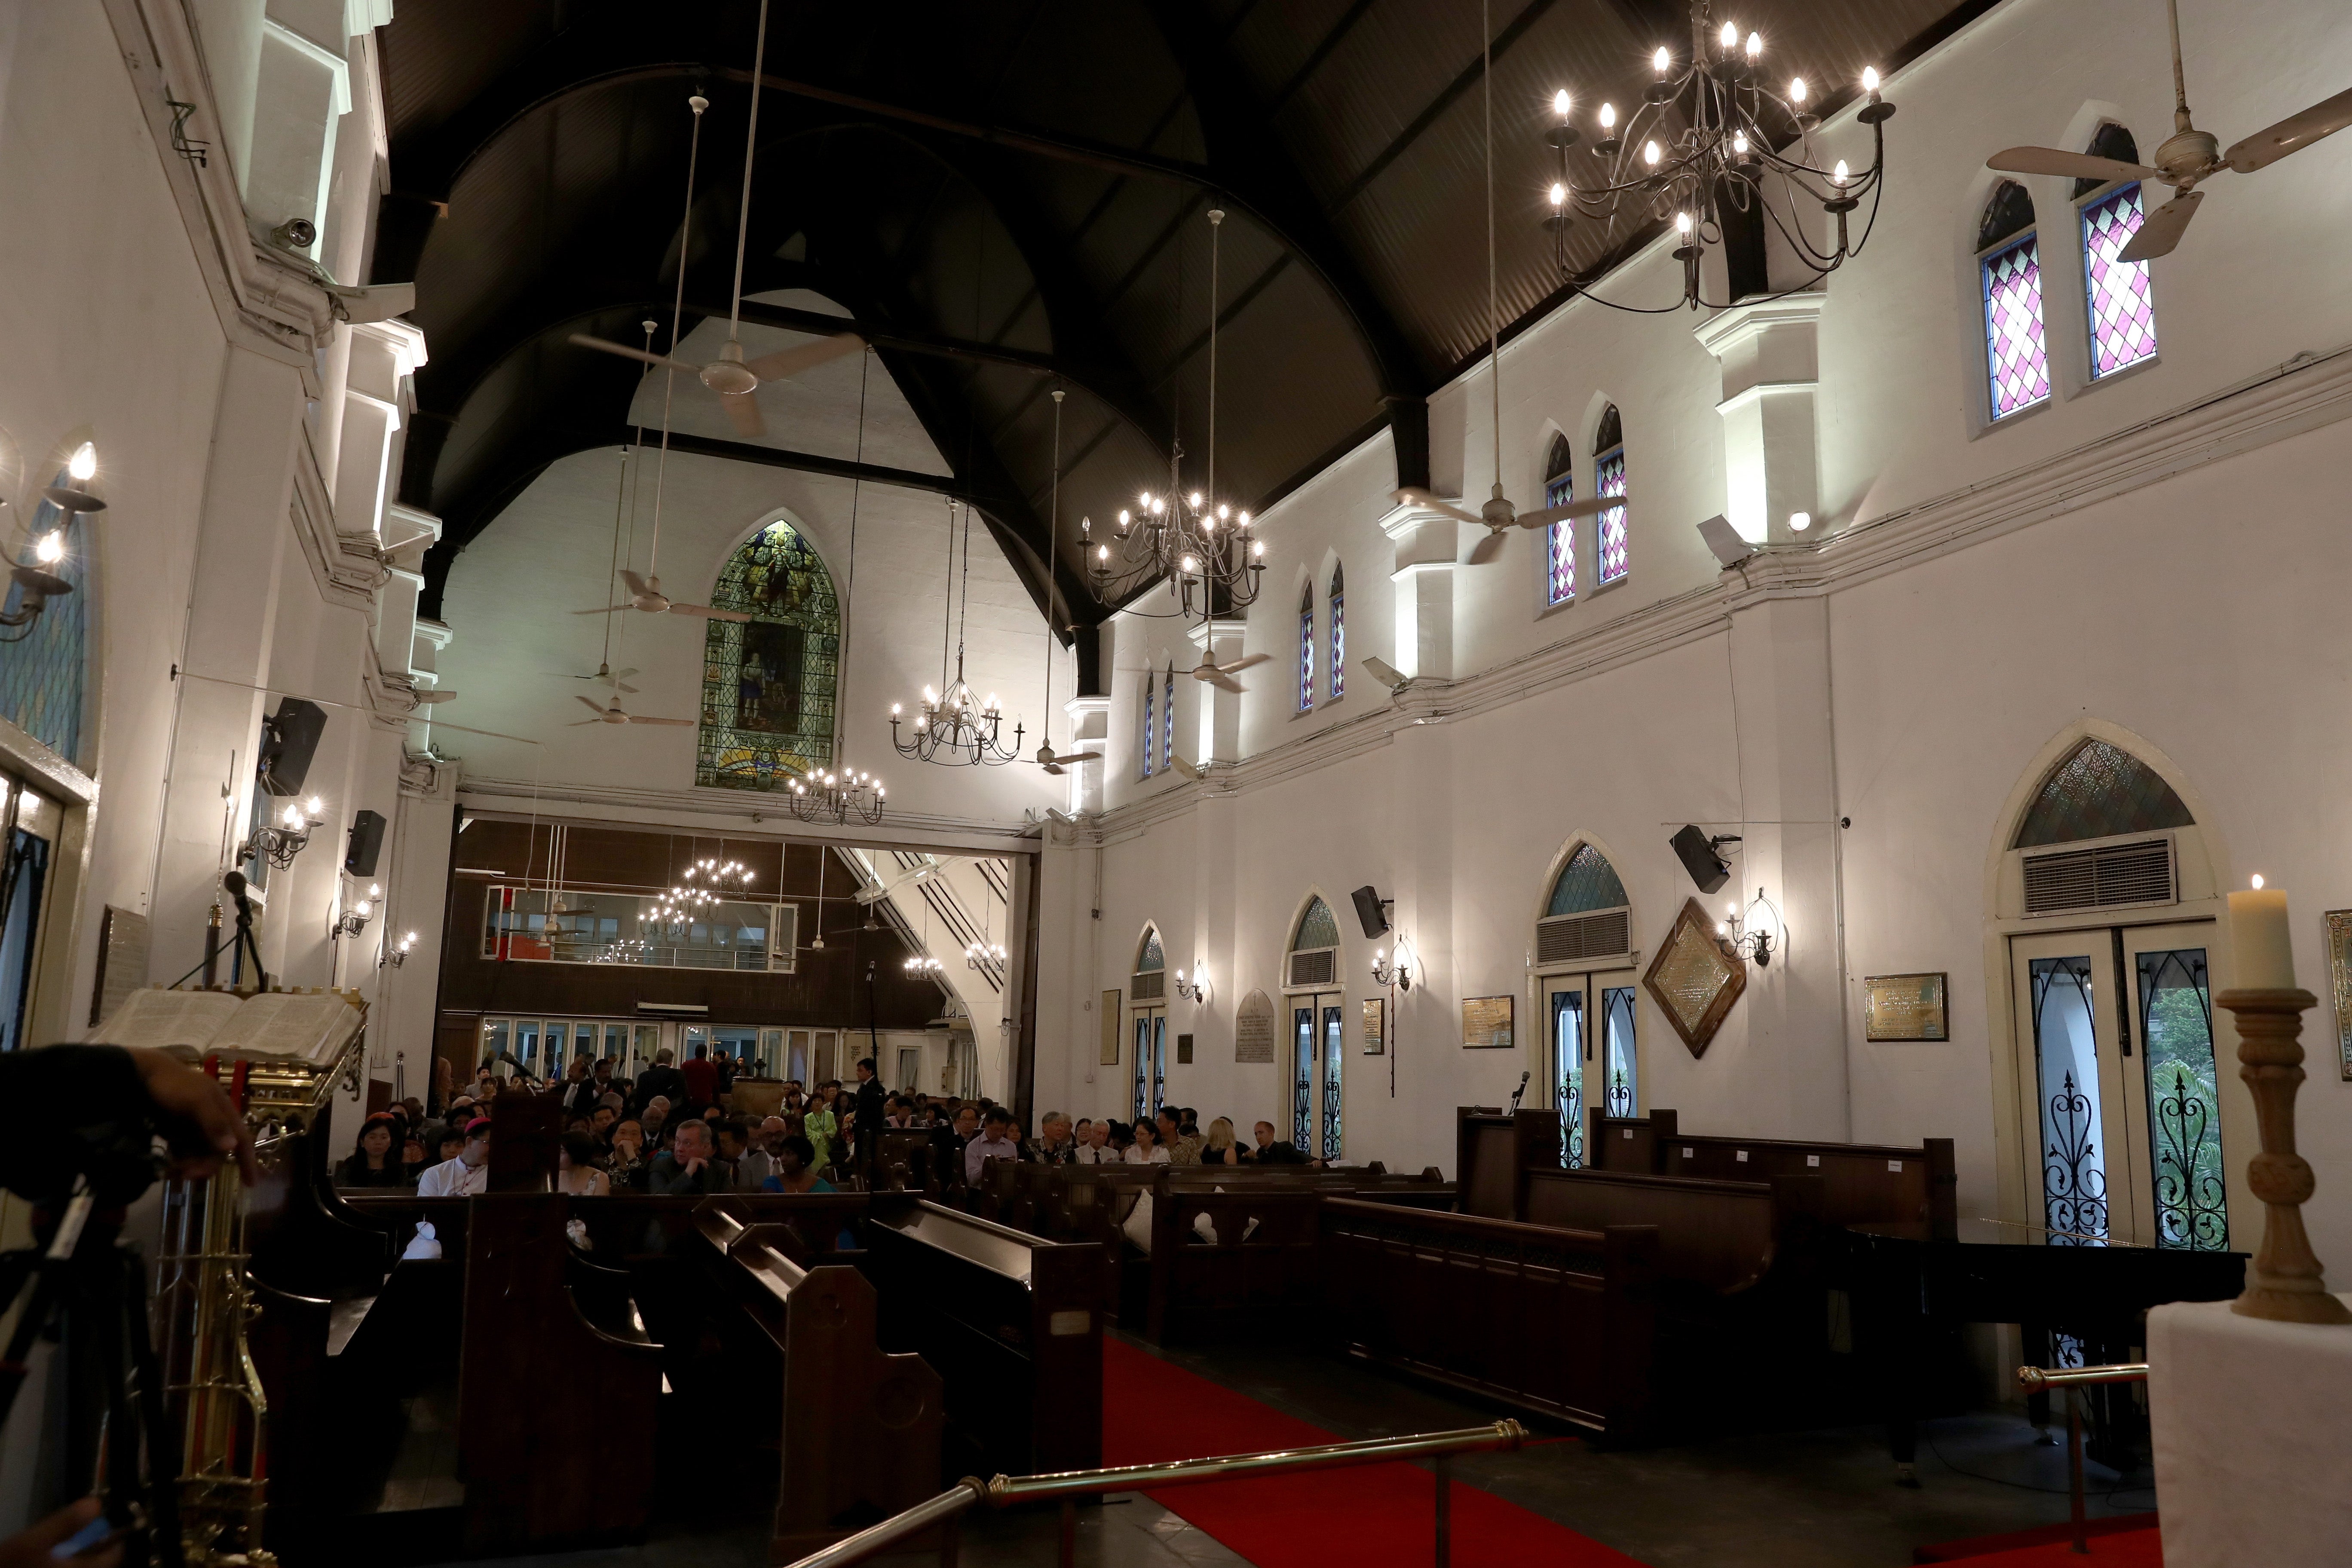 File Image: An interior view St Mary's Cathedral in Kuala Lumpur, Malaysia